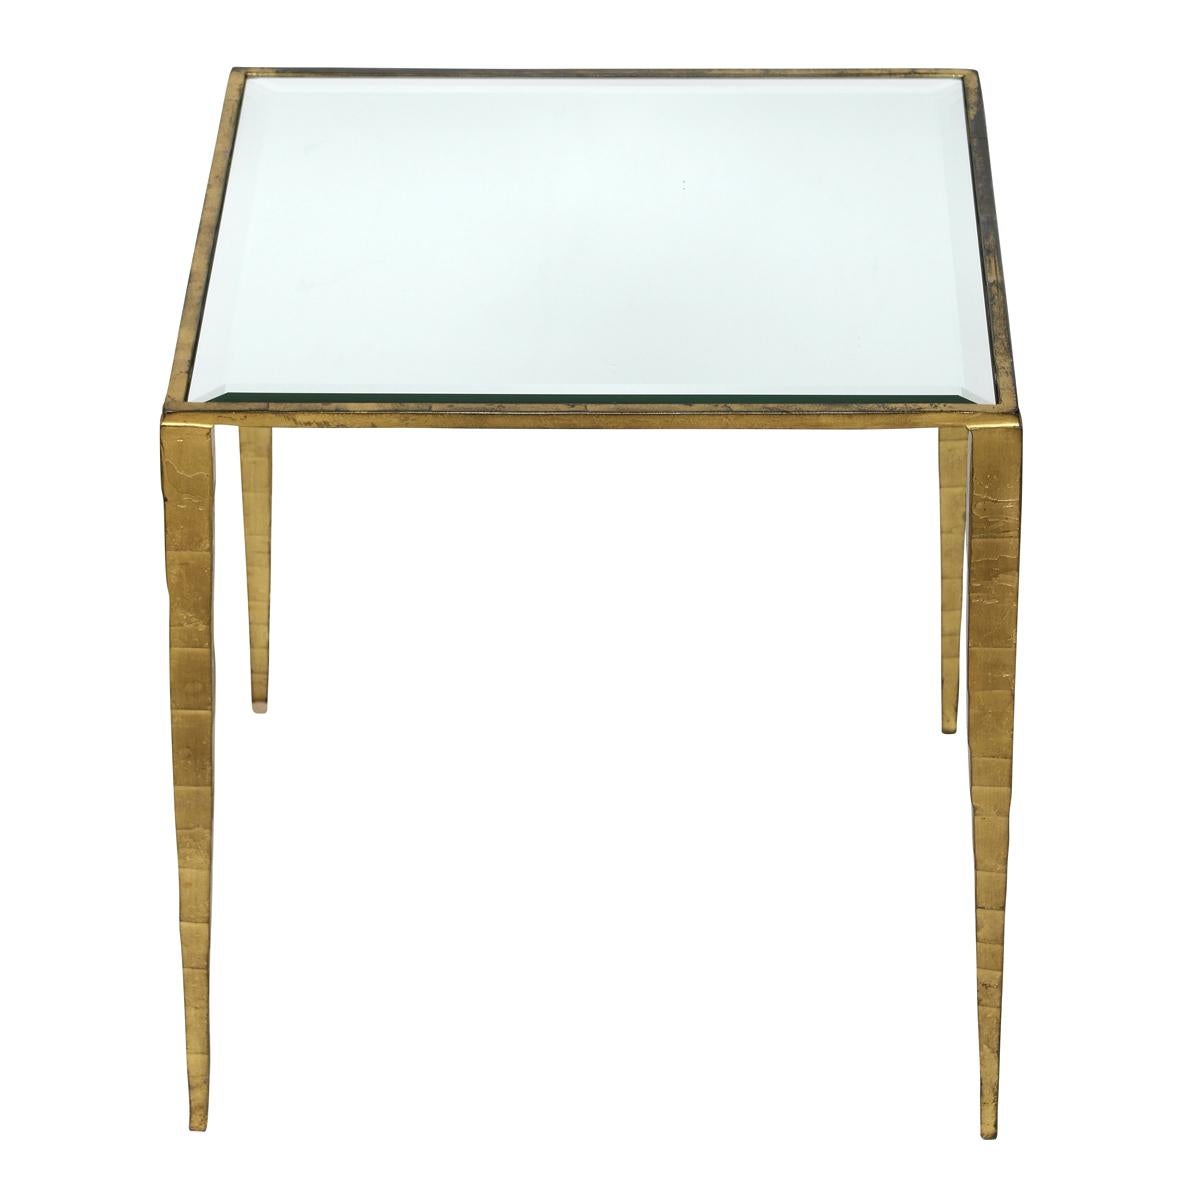 Pair of gilt metal side tables with slender tapered legs and mirrored tops.